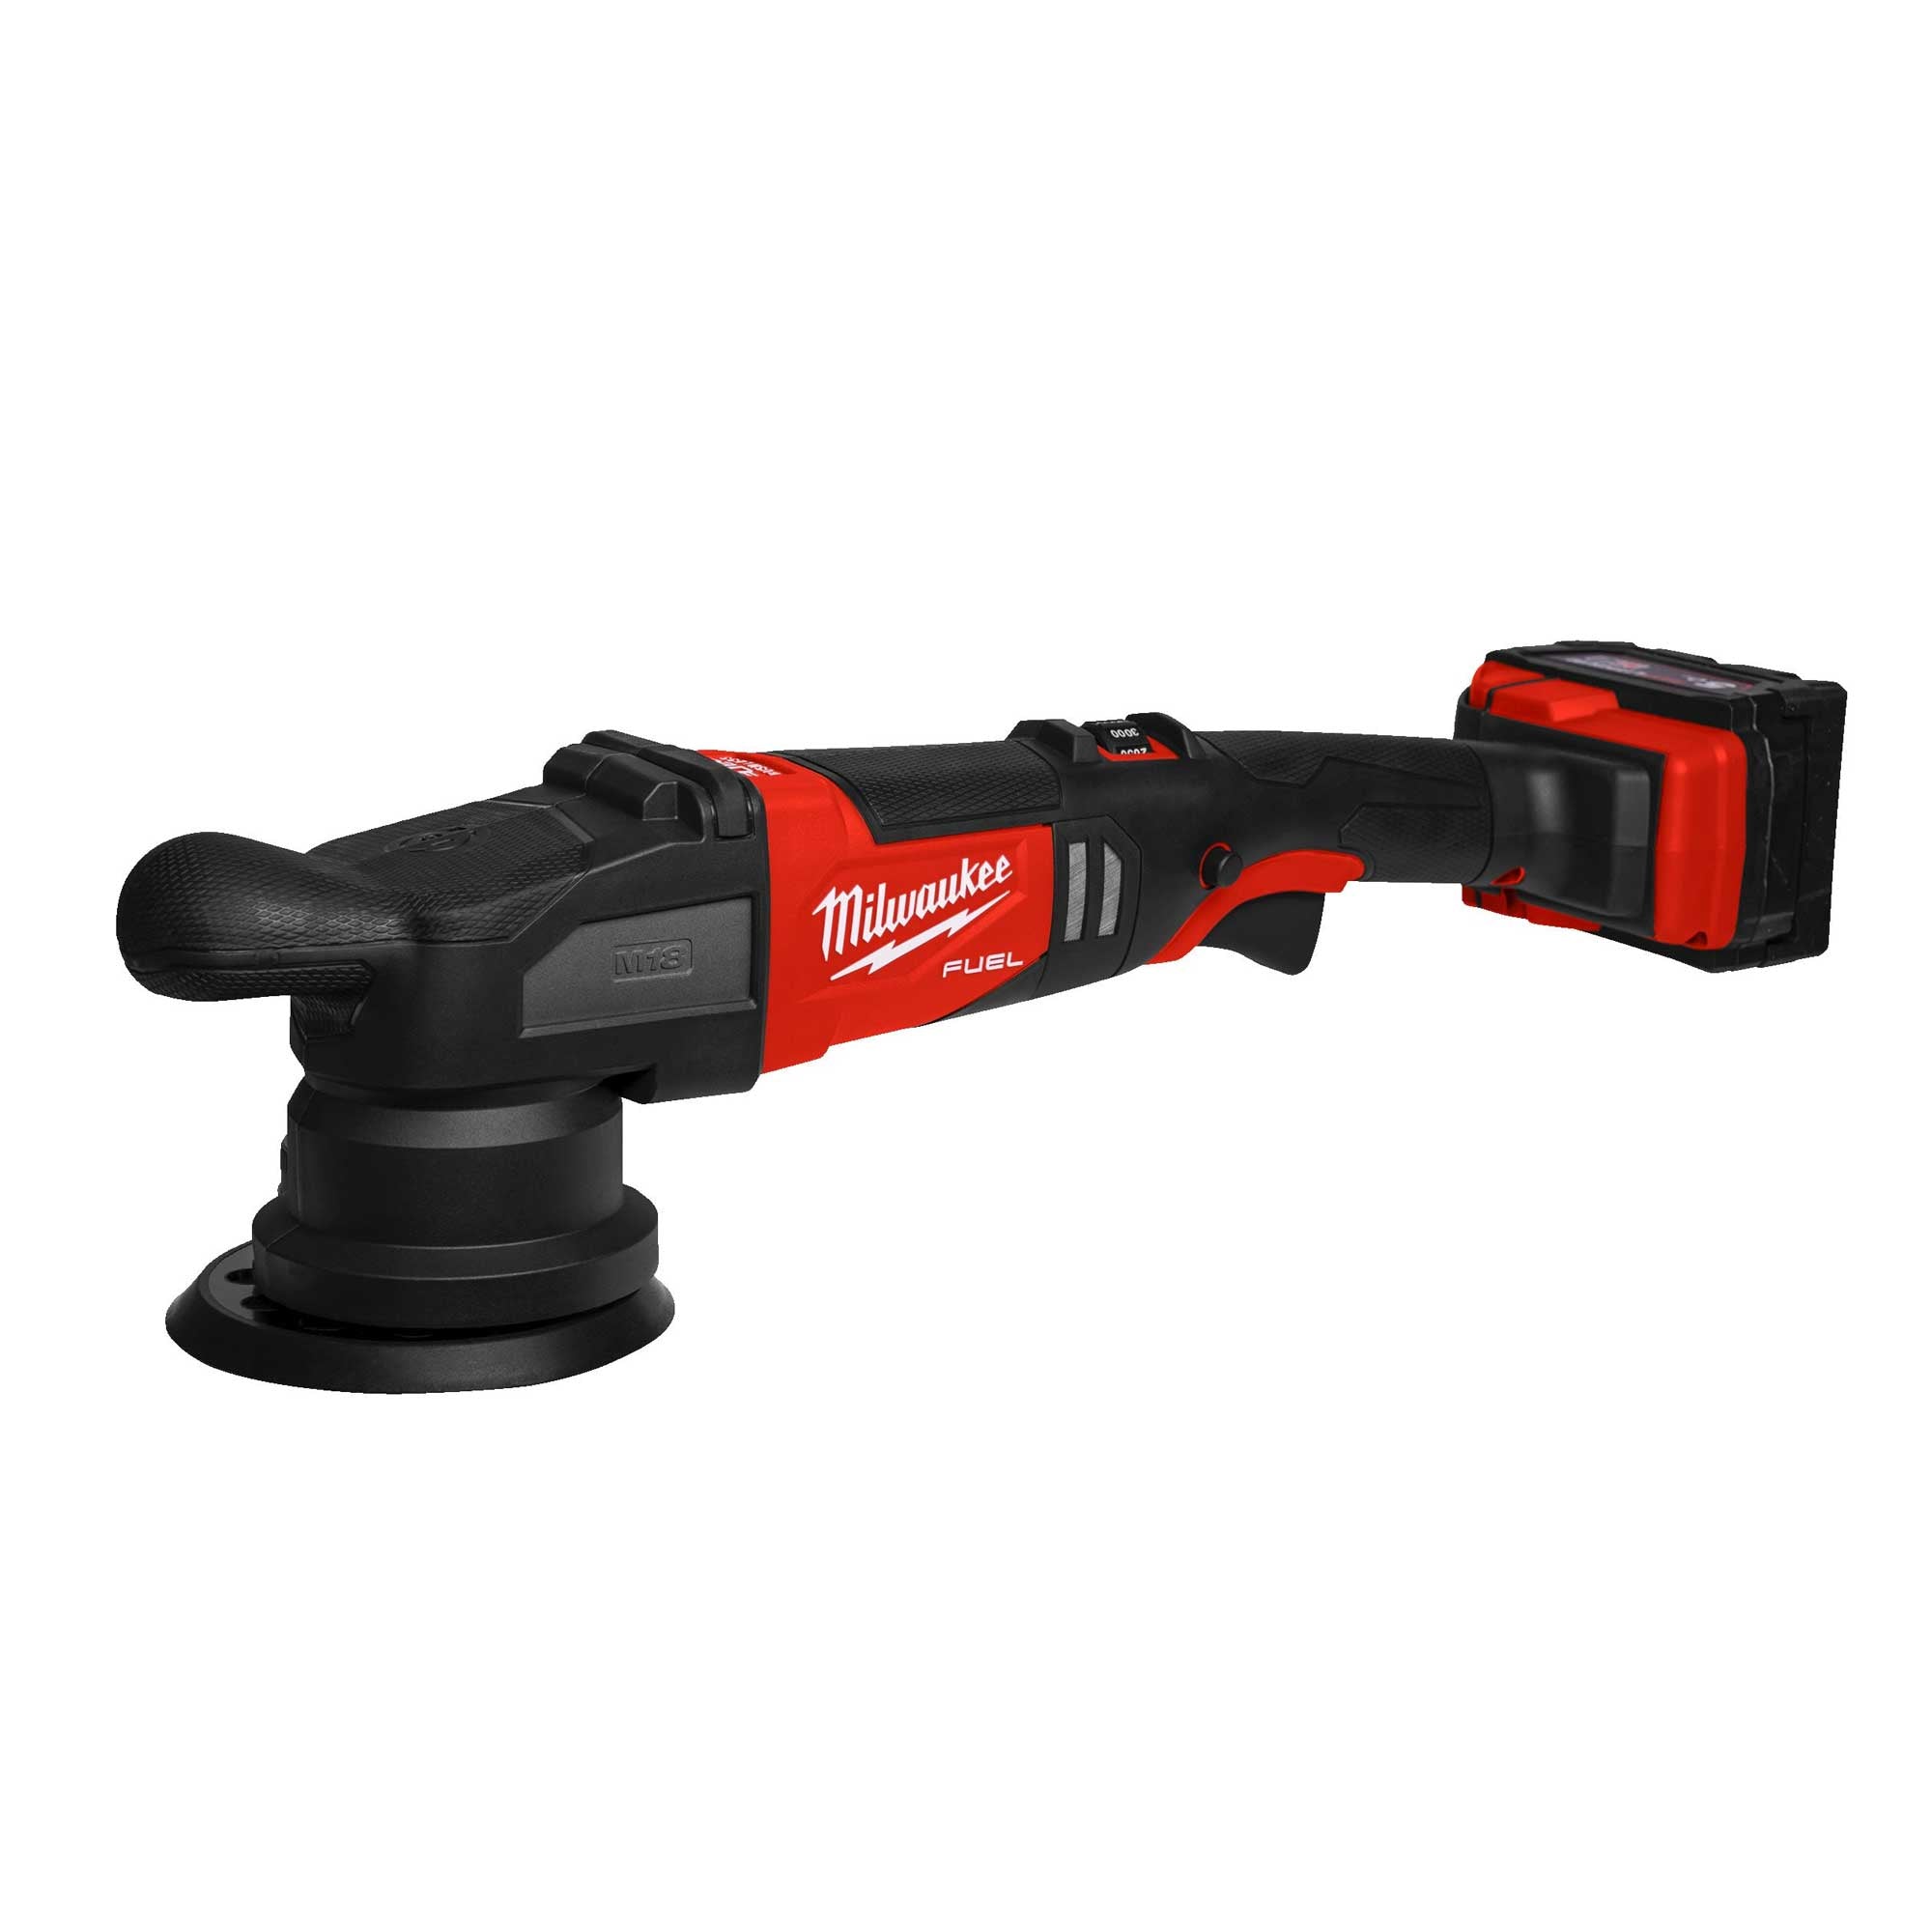 Lucidatrice Milwaukee M18 FROP15-502X 18V 5.0 Ah